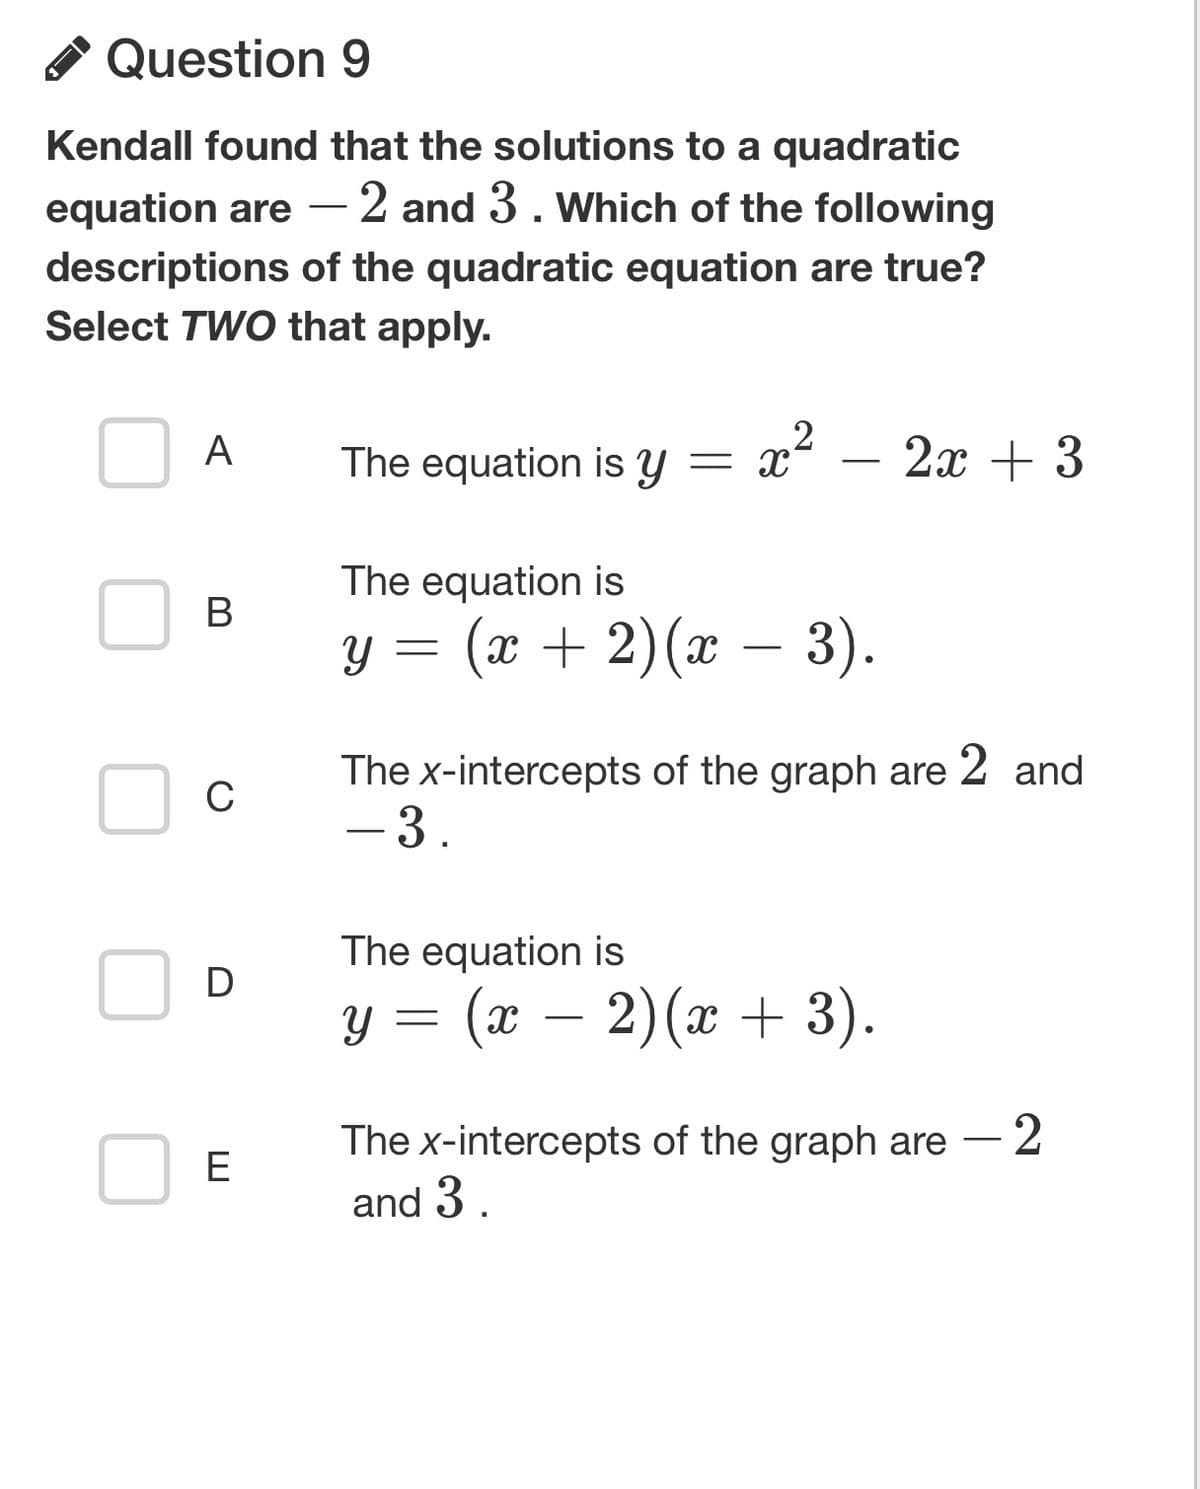 Question 9
Kendall found that the solutions to a quadratic
equation are
- 2 and 3. Which of the following
descriptions of the quadratic equation are true?
Select TWO that apply.
A
B
C
D
E
The equation is y
The equation is
Y
=
Y
x² - 2x + 3
2
(x + 2)(x − 3).
The x-intercepts of the graph are 2 and
- 3.
The equation is
=
= (x − 2)(x + 3).
The x-intercepts of the graph are - 2
and 3.